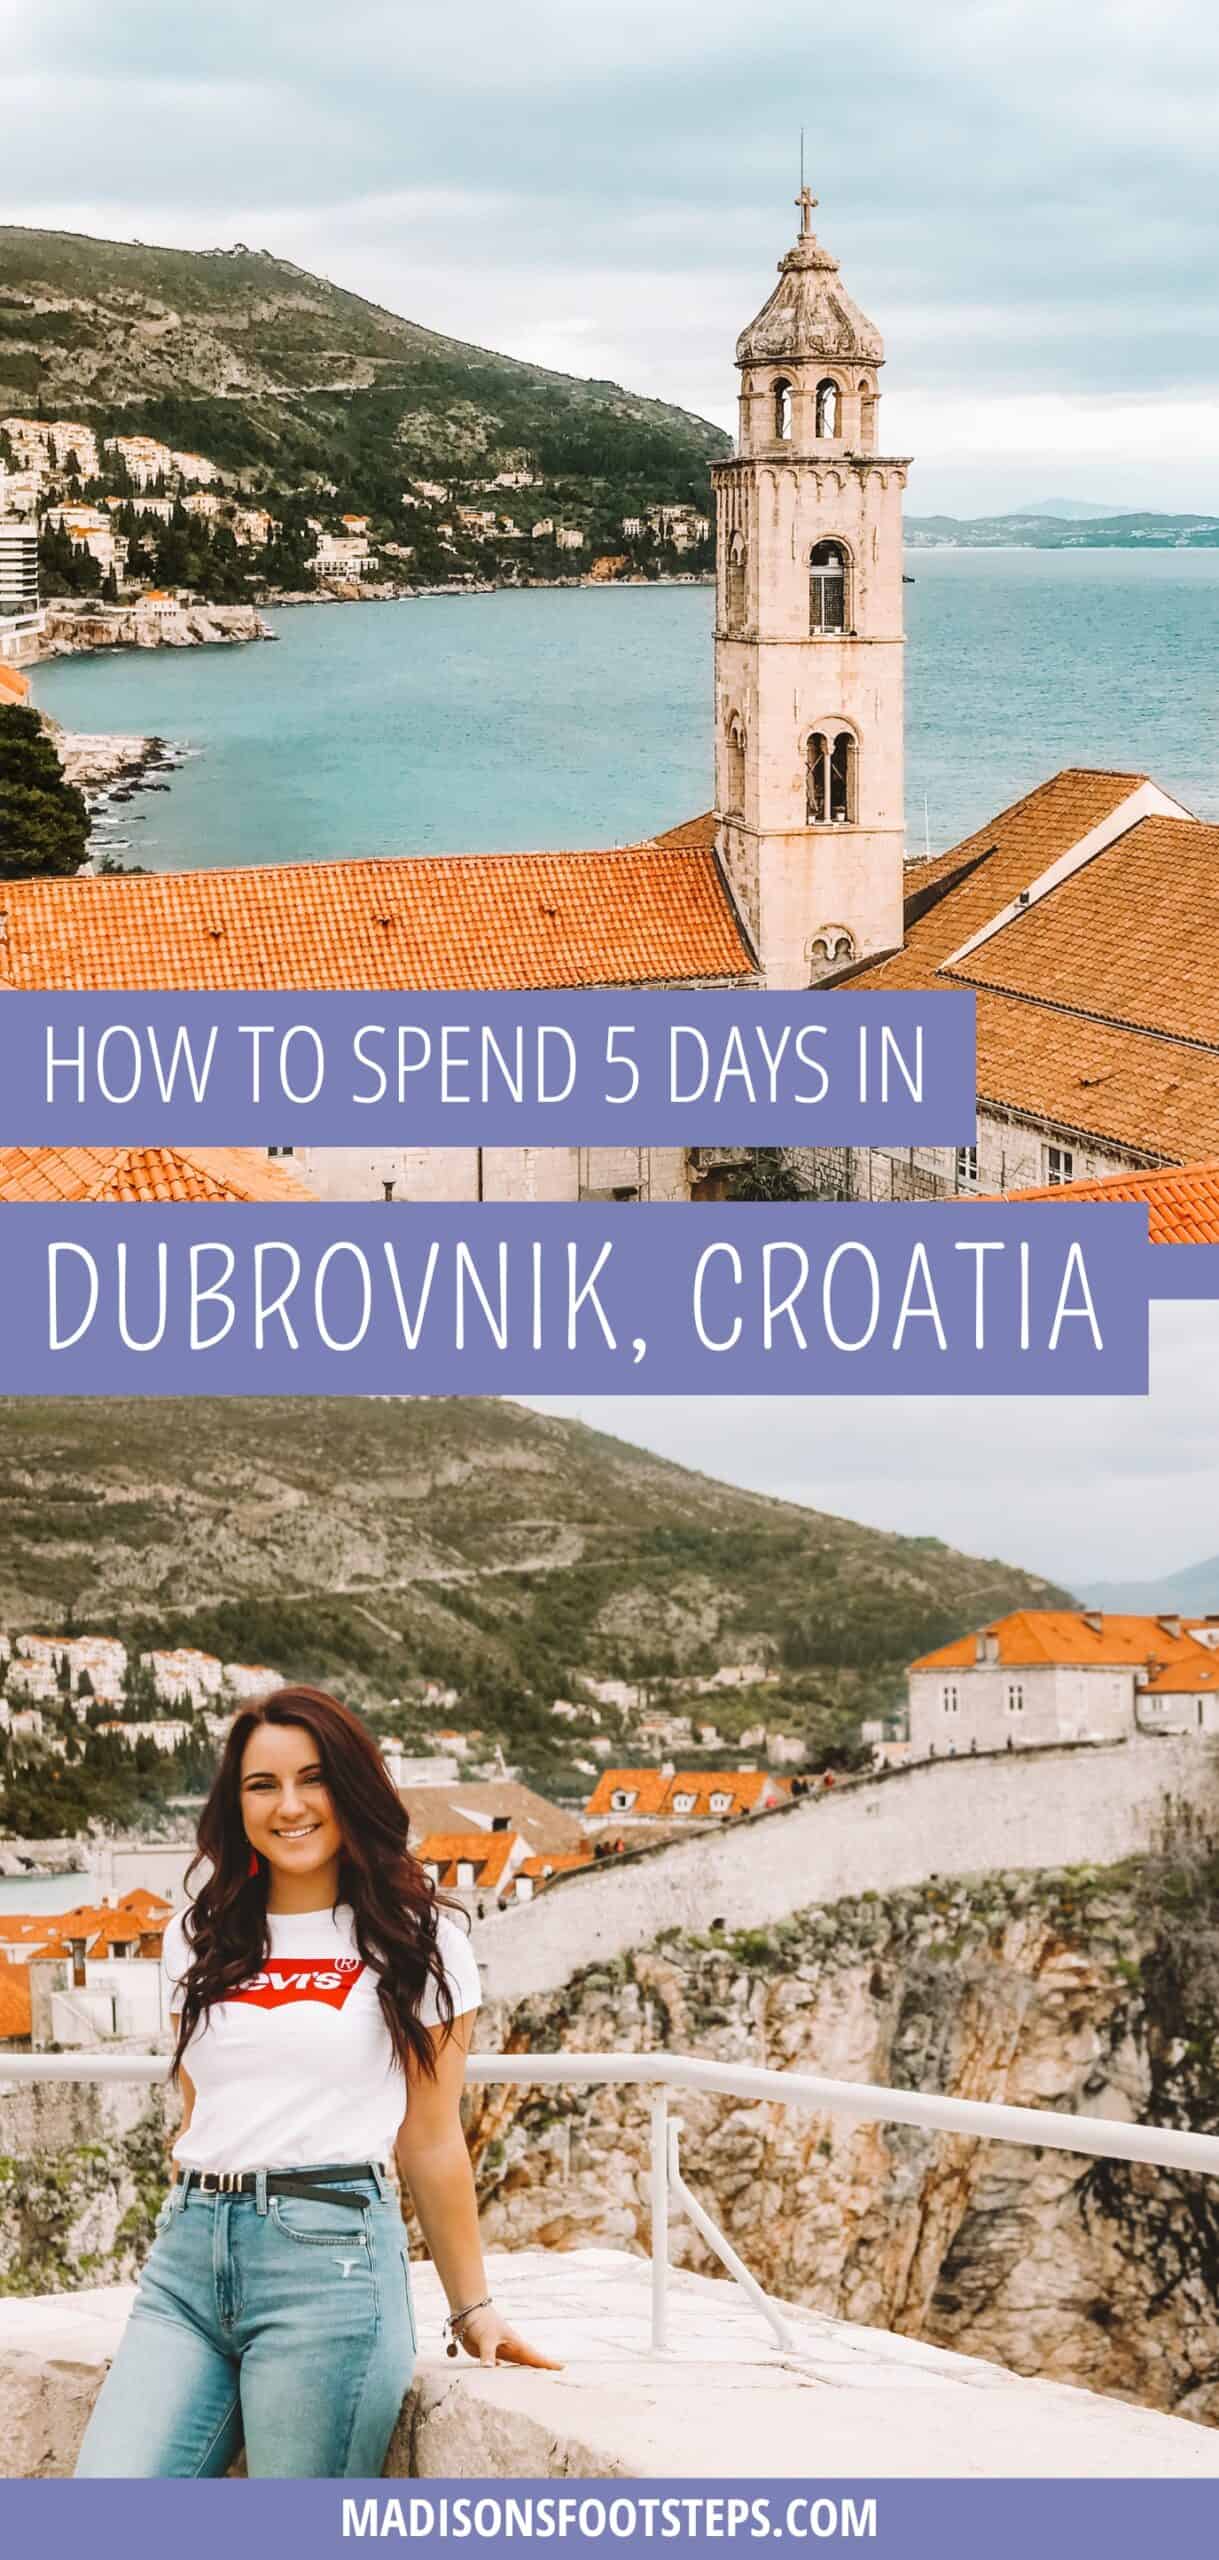 Pin for 5 days in Dubrovnik blog post